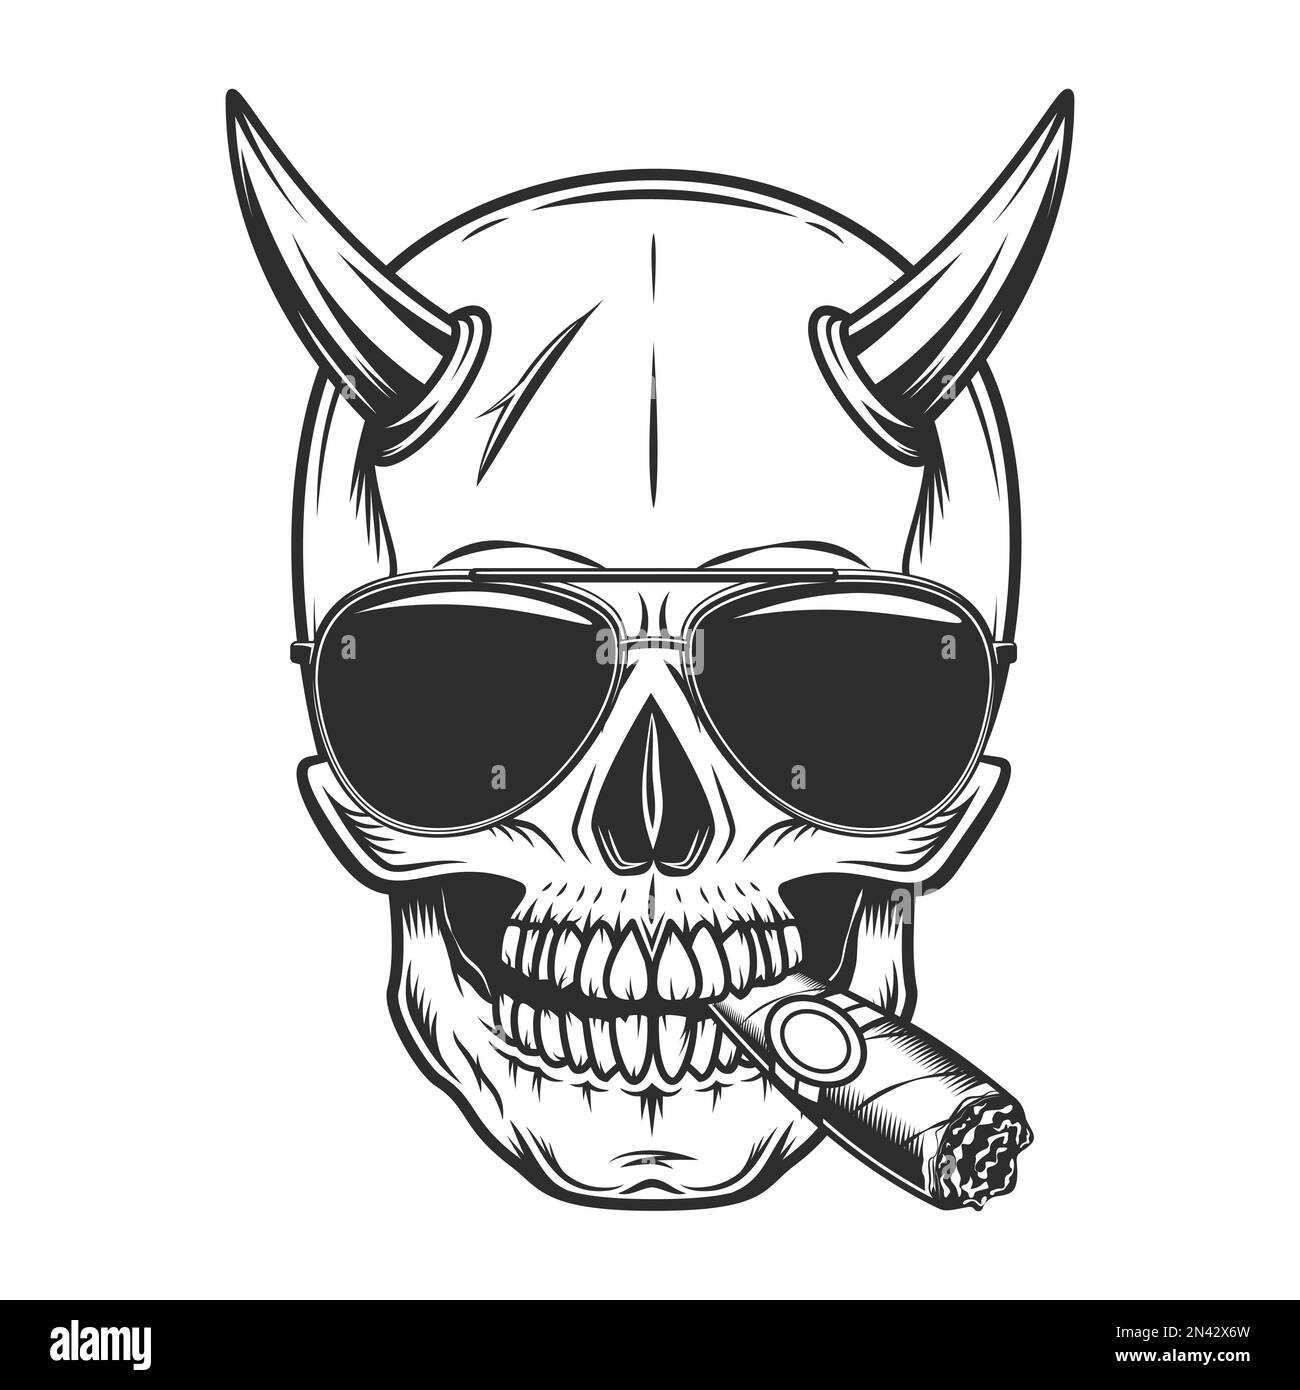 Skull with horn smoking cigar or cigarette smoke with sunglasses accessory to protect eyes from bright sun vintage isolated illustration Stock Photo